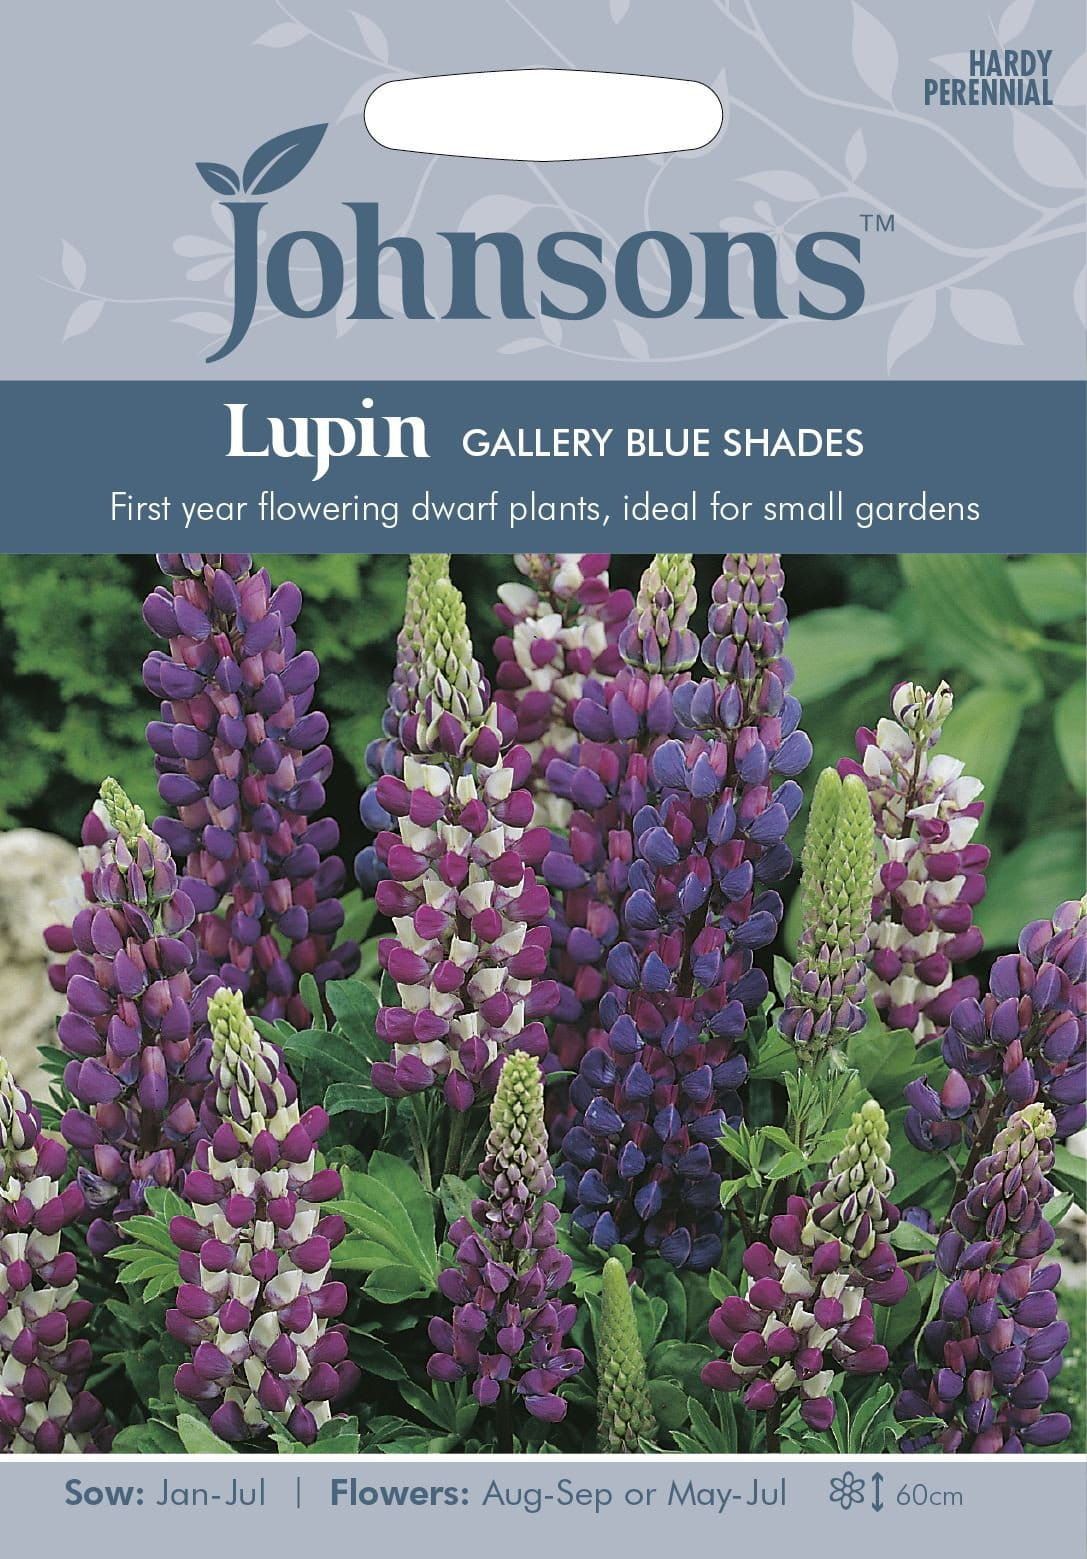 Johnsons Lupin Gallery Blue Shades 20 Seeds